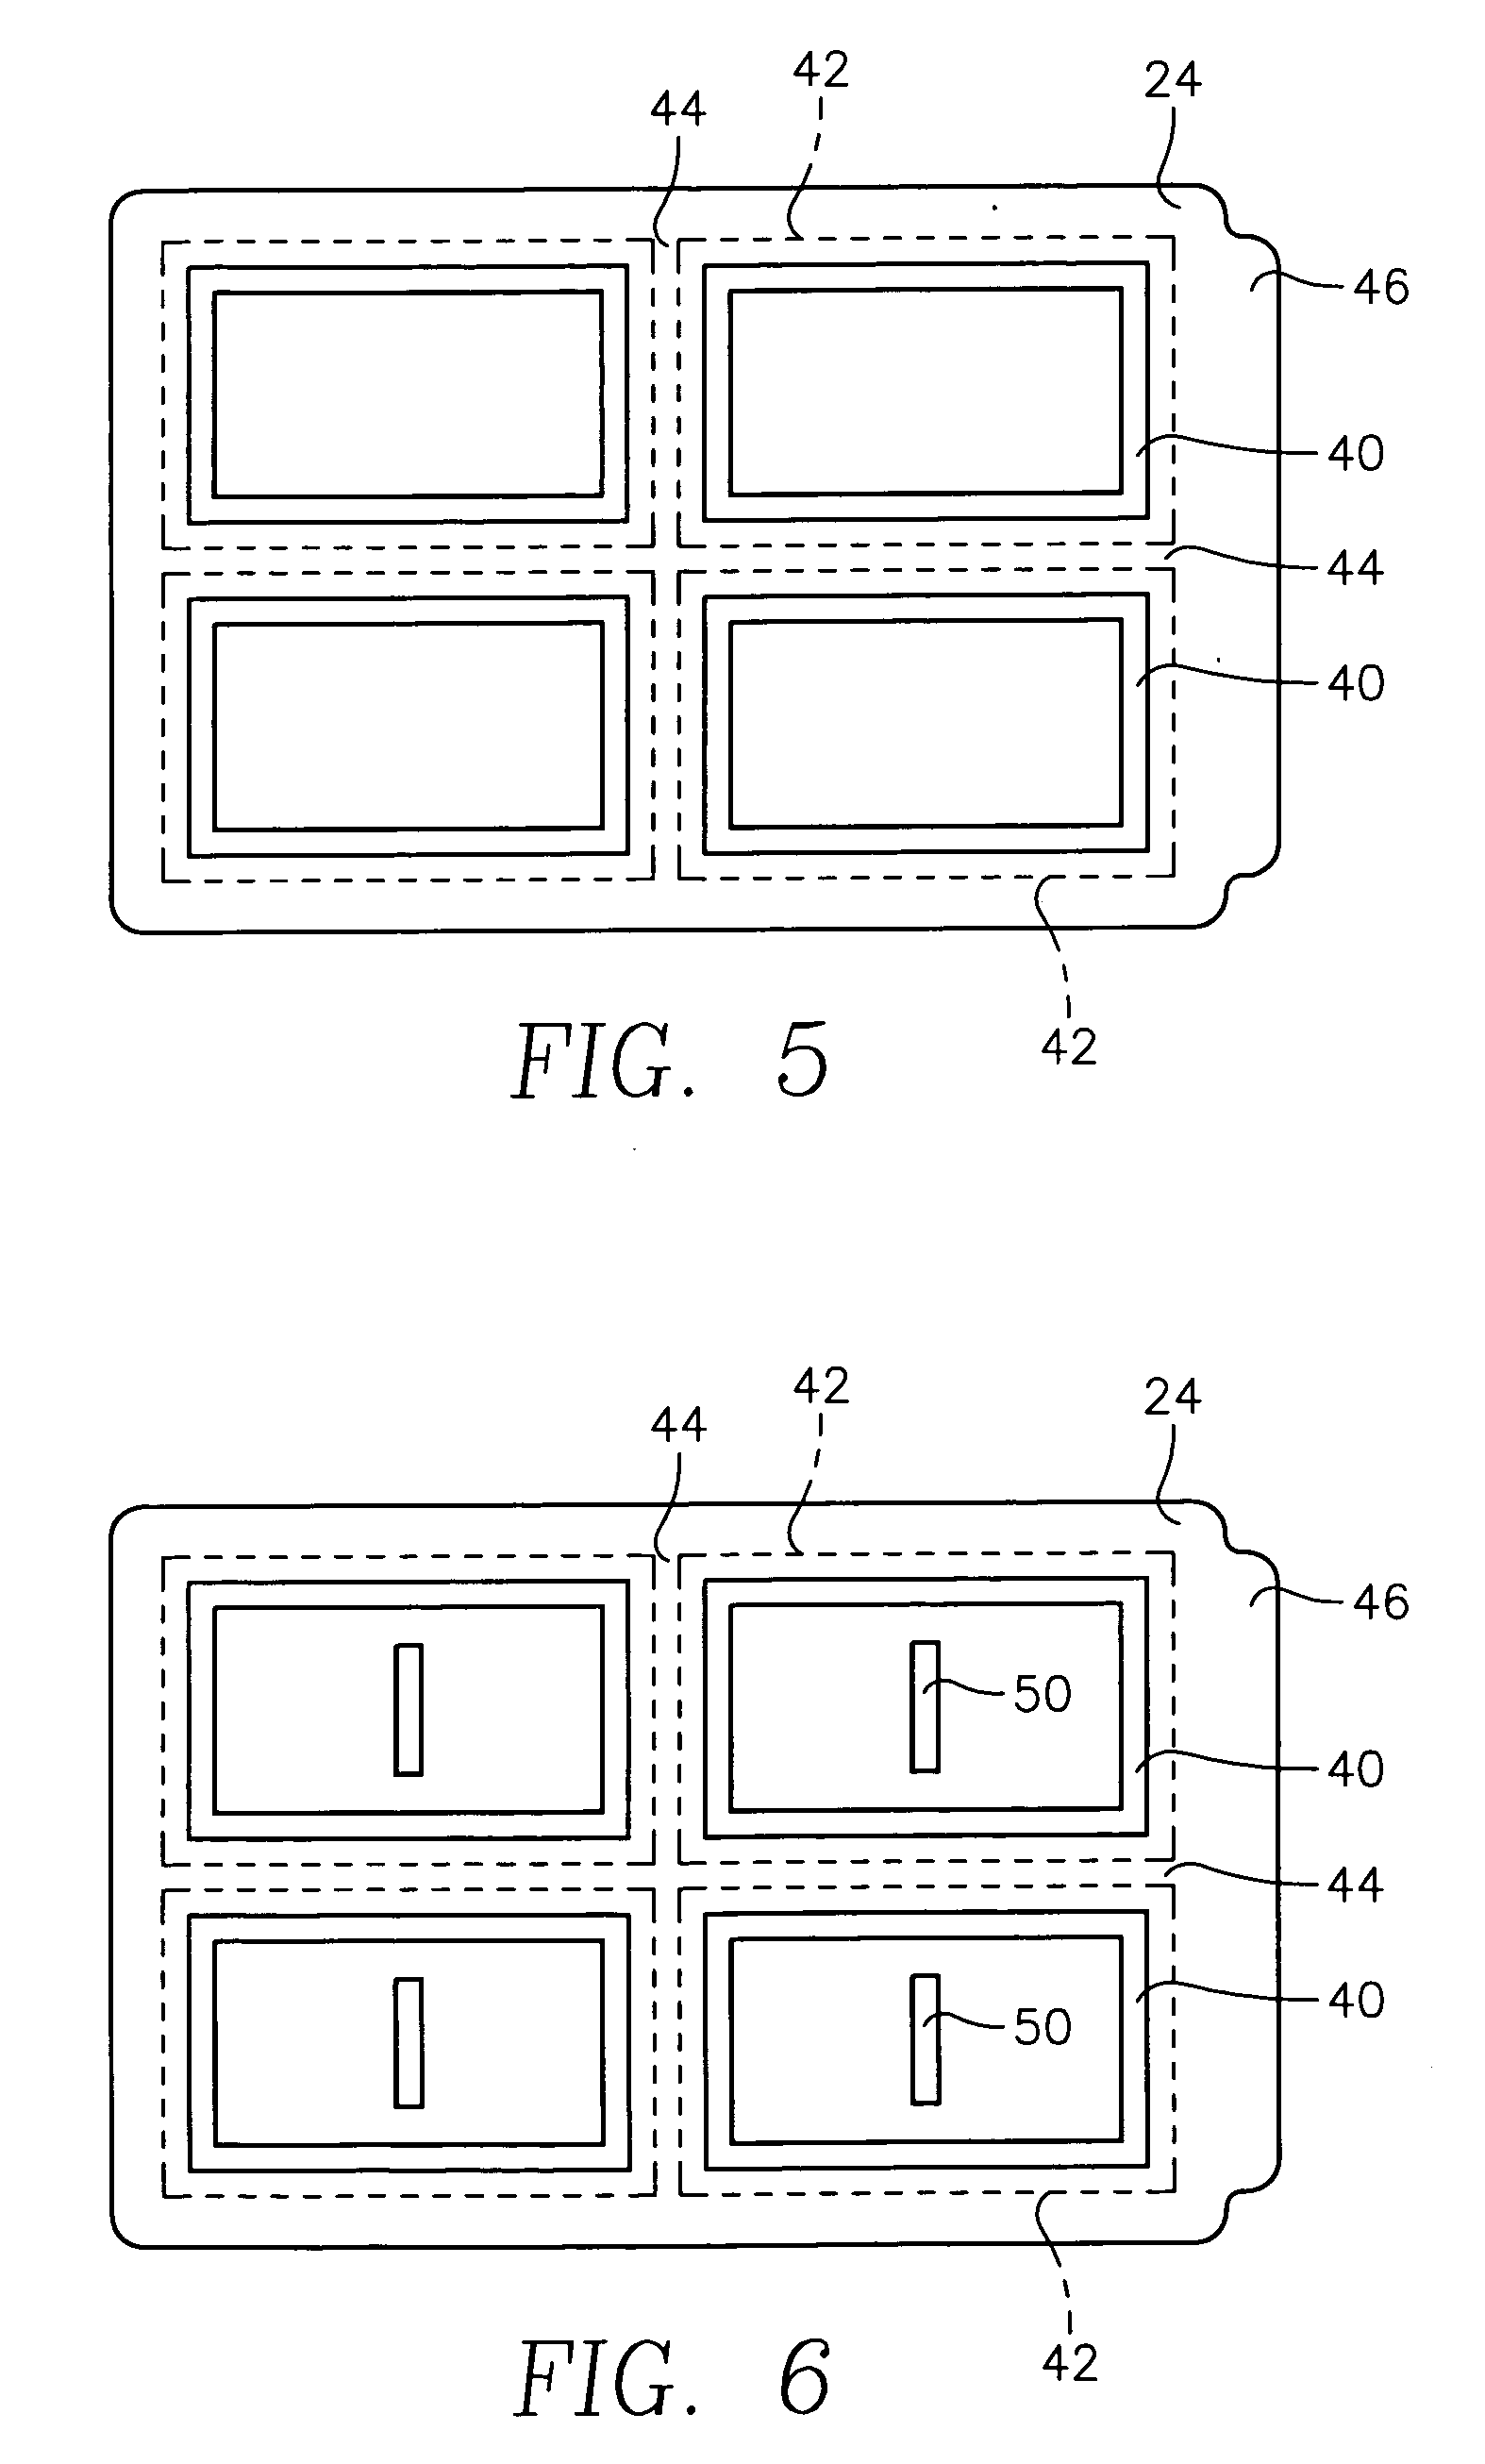 Bonding of target tiles to backing plate with patterned bonding agent